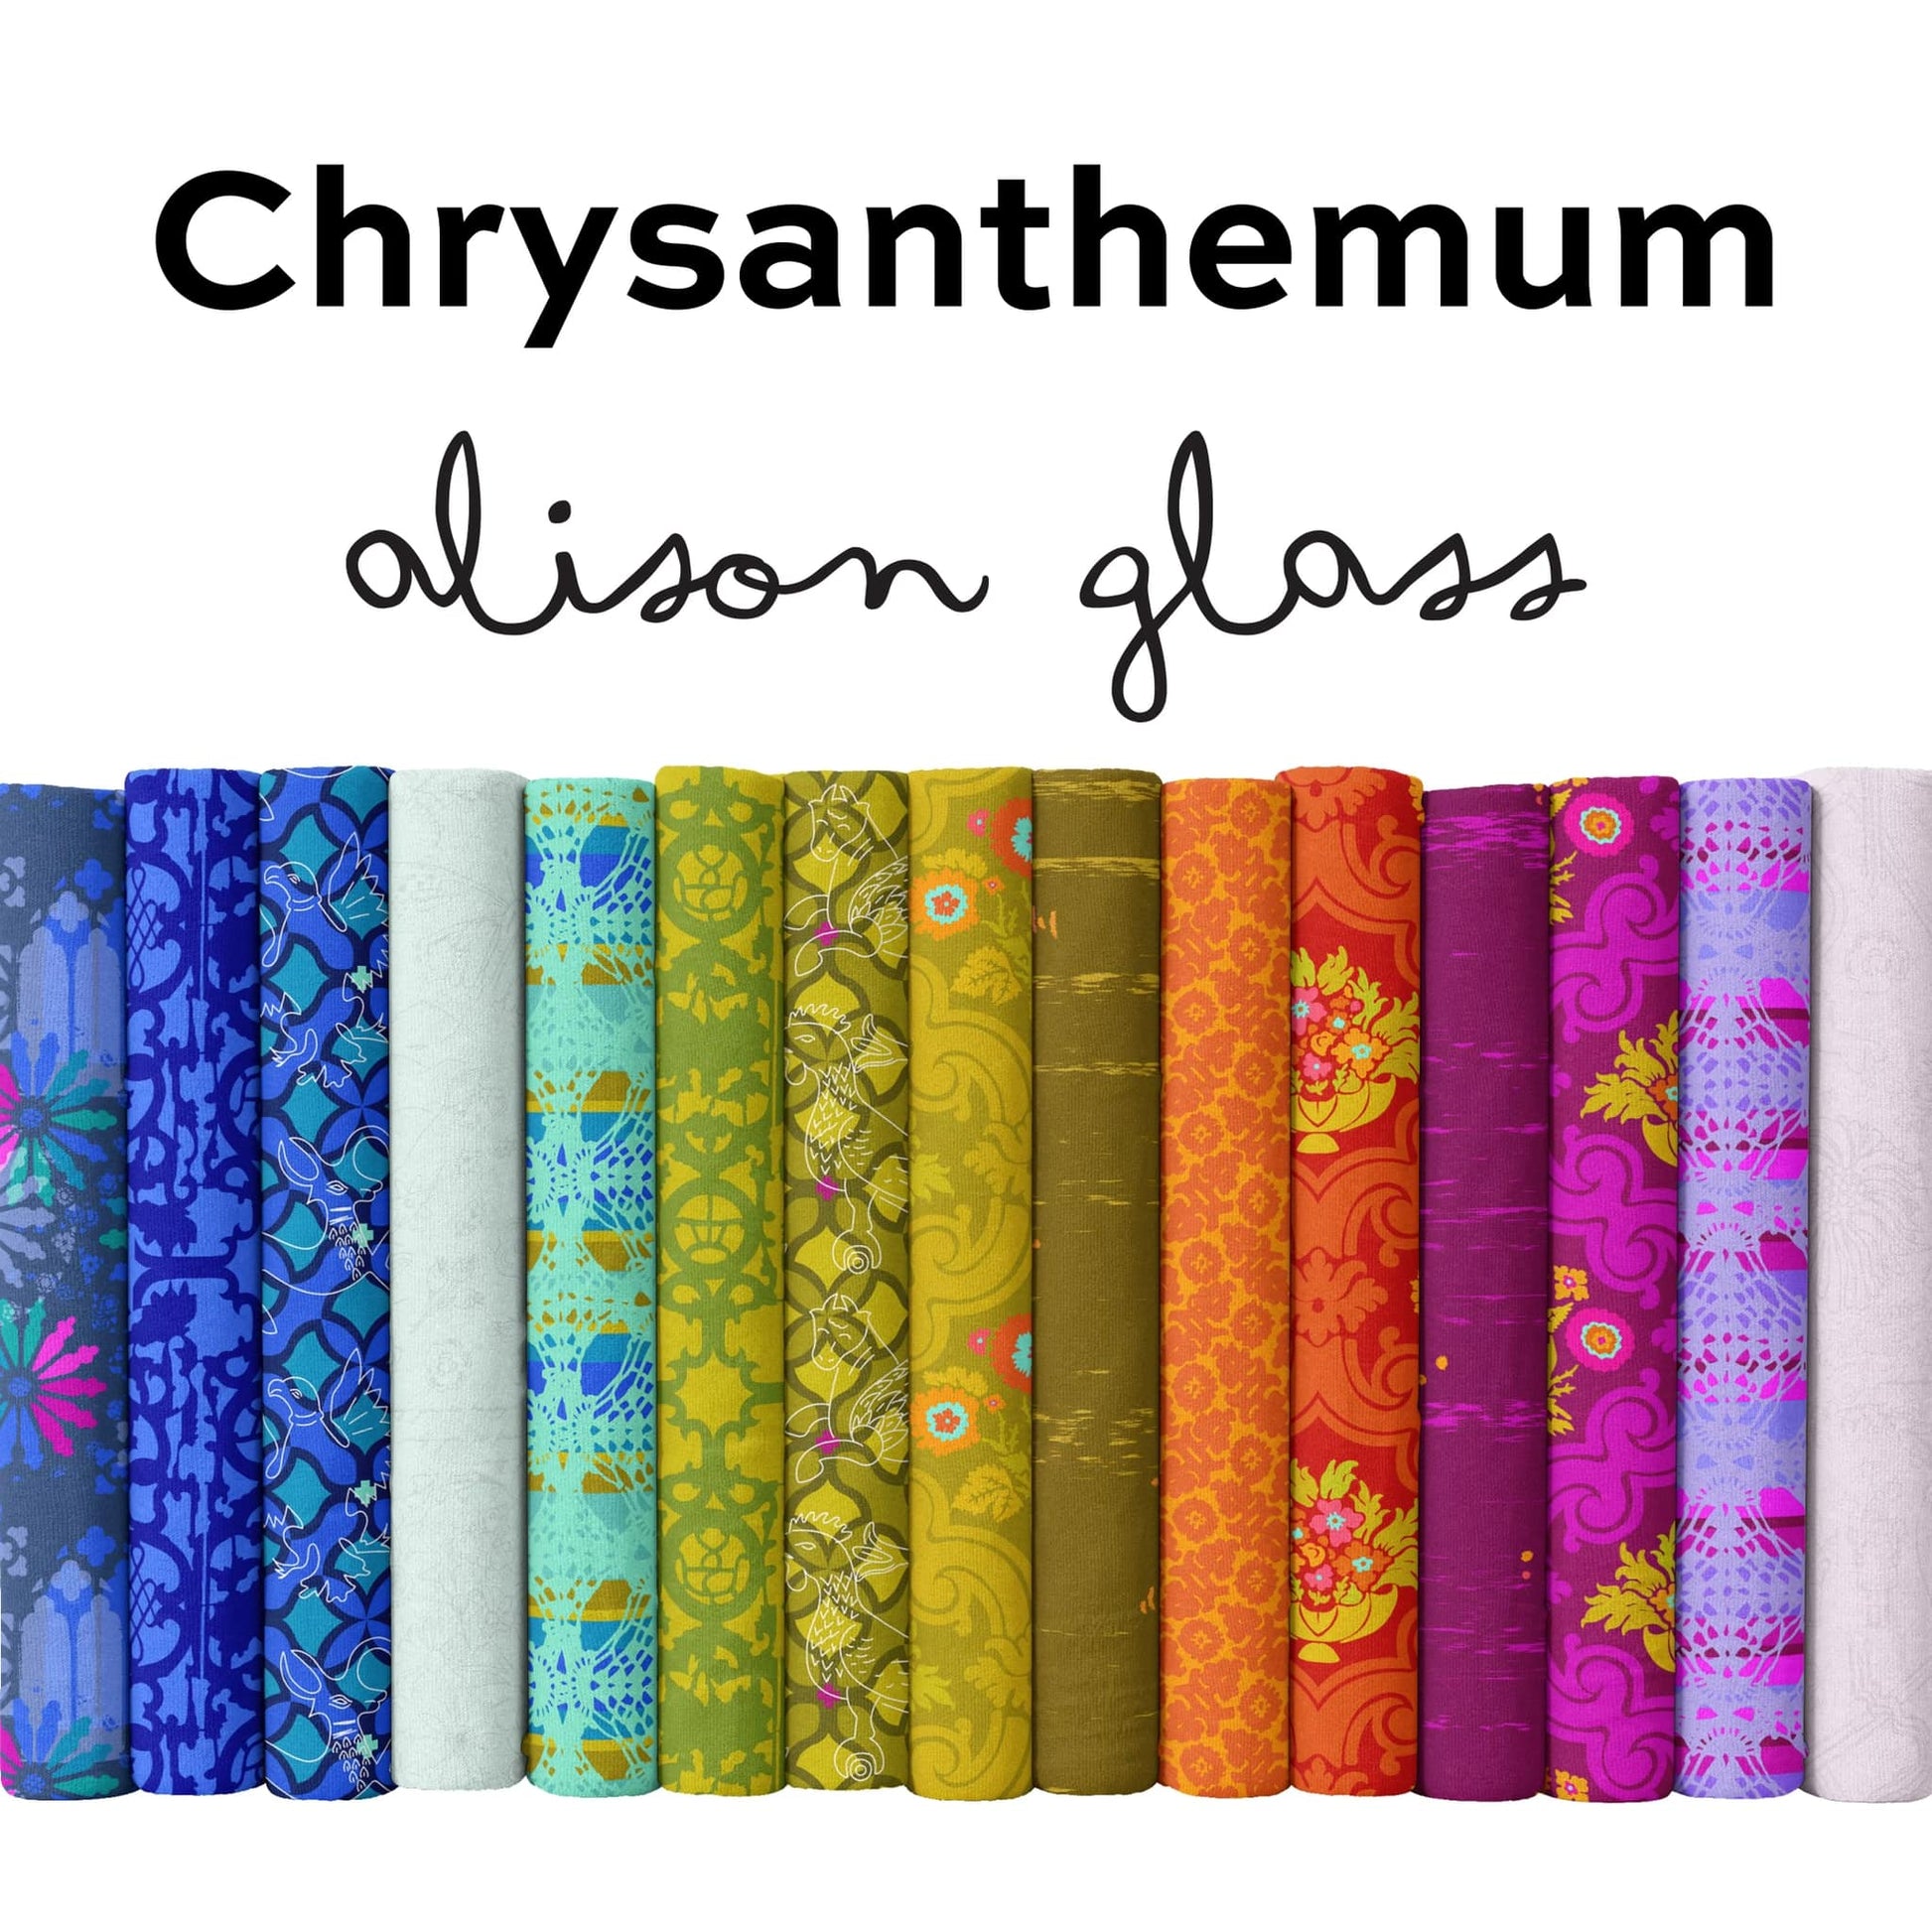 This HALF YARD BUNDLE contains 24 quilting cotton prints from Chrysanthemum by Alison Glass for Andover Fabrics  Manufacturer: Andover Fabrics Designer: Alison Glass Collection: Chrysanthemum Material: 100% Cotton Weight: Quilting